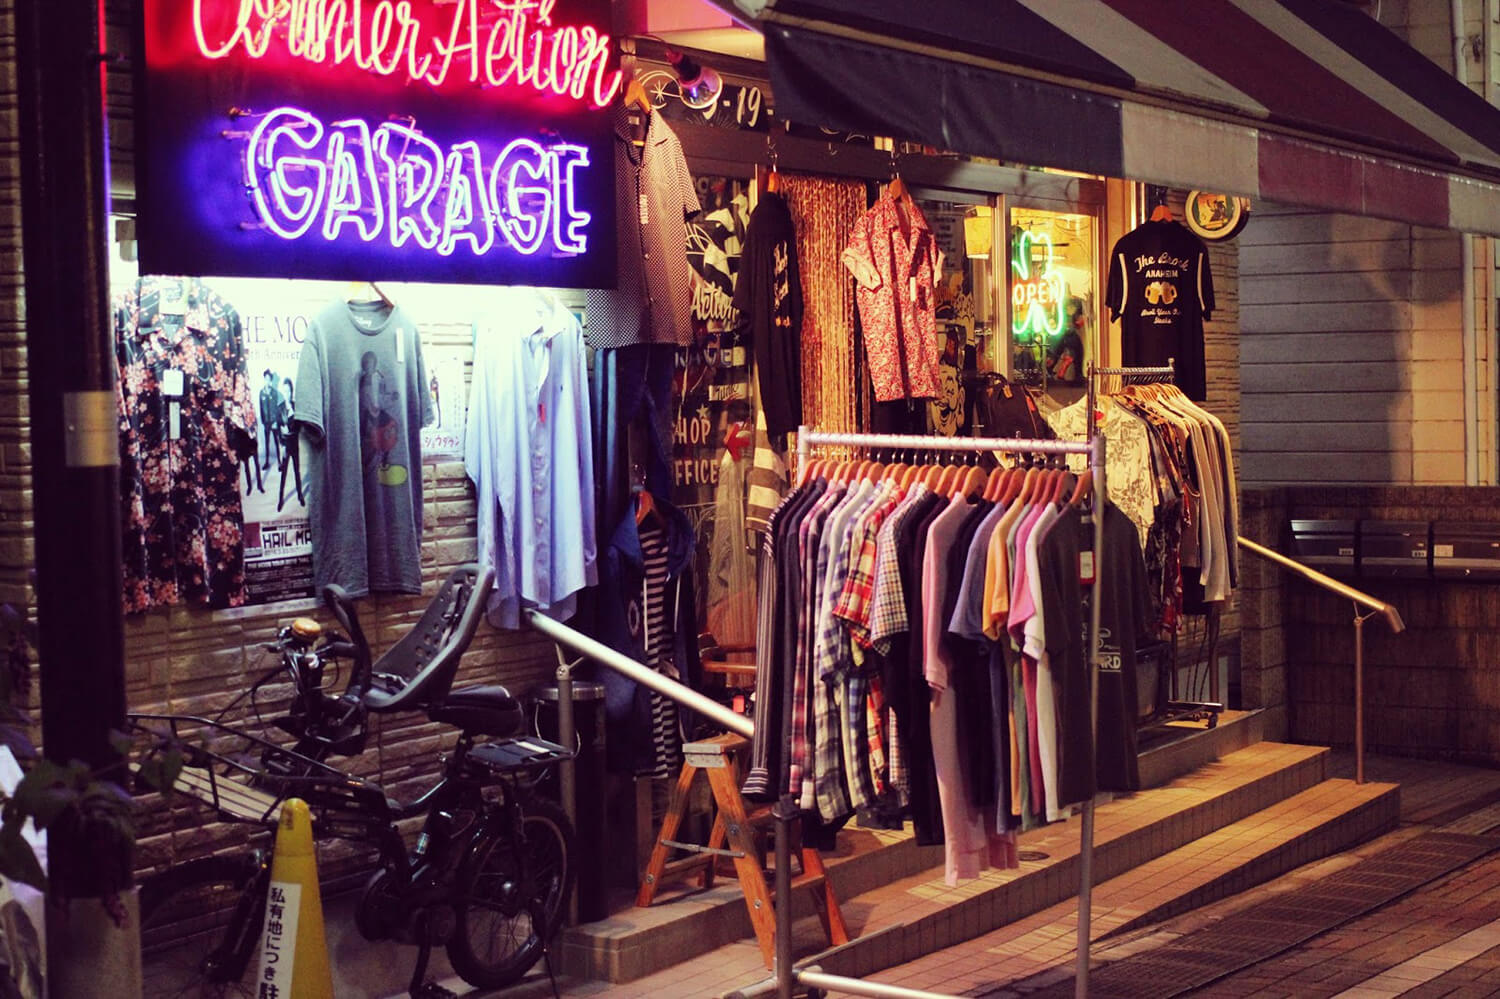 10 Tokyo Thrift Stores Where You Can Score Branded Goods For Cheap